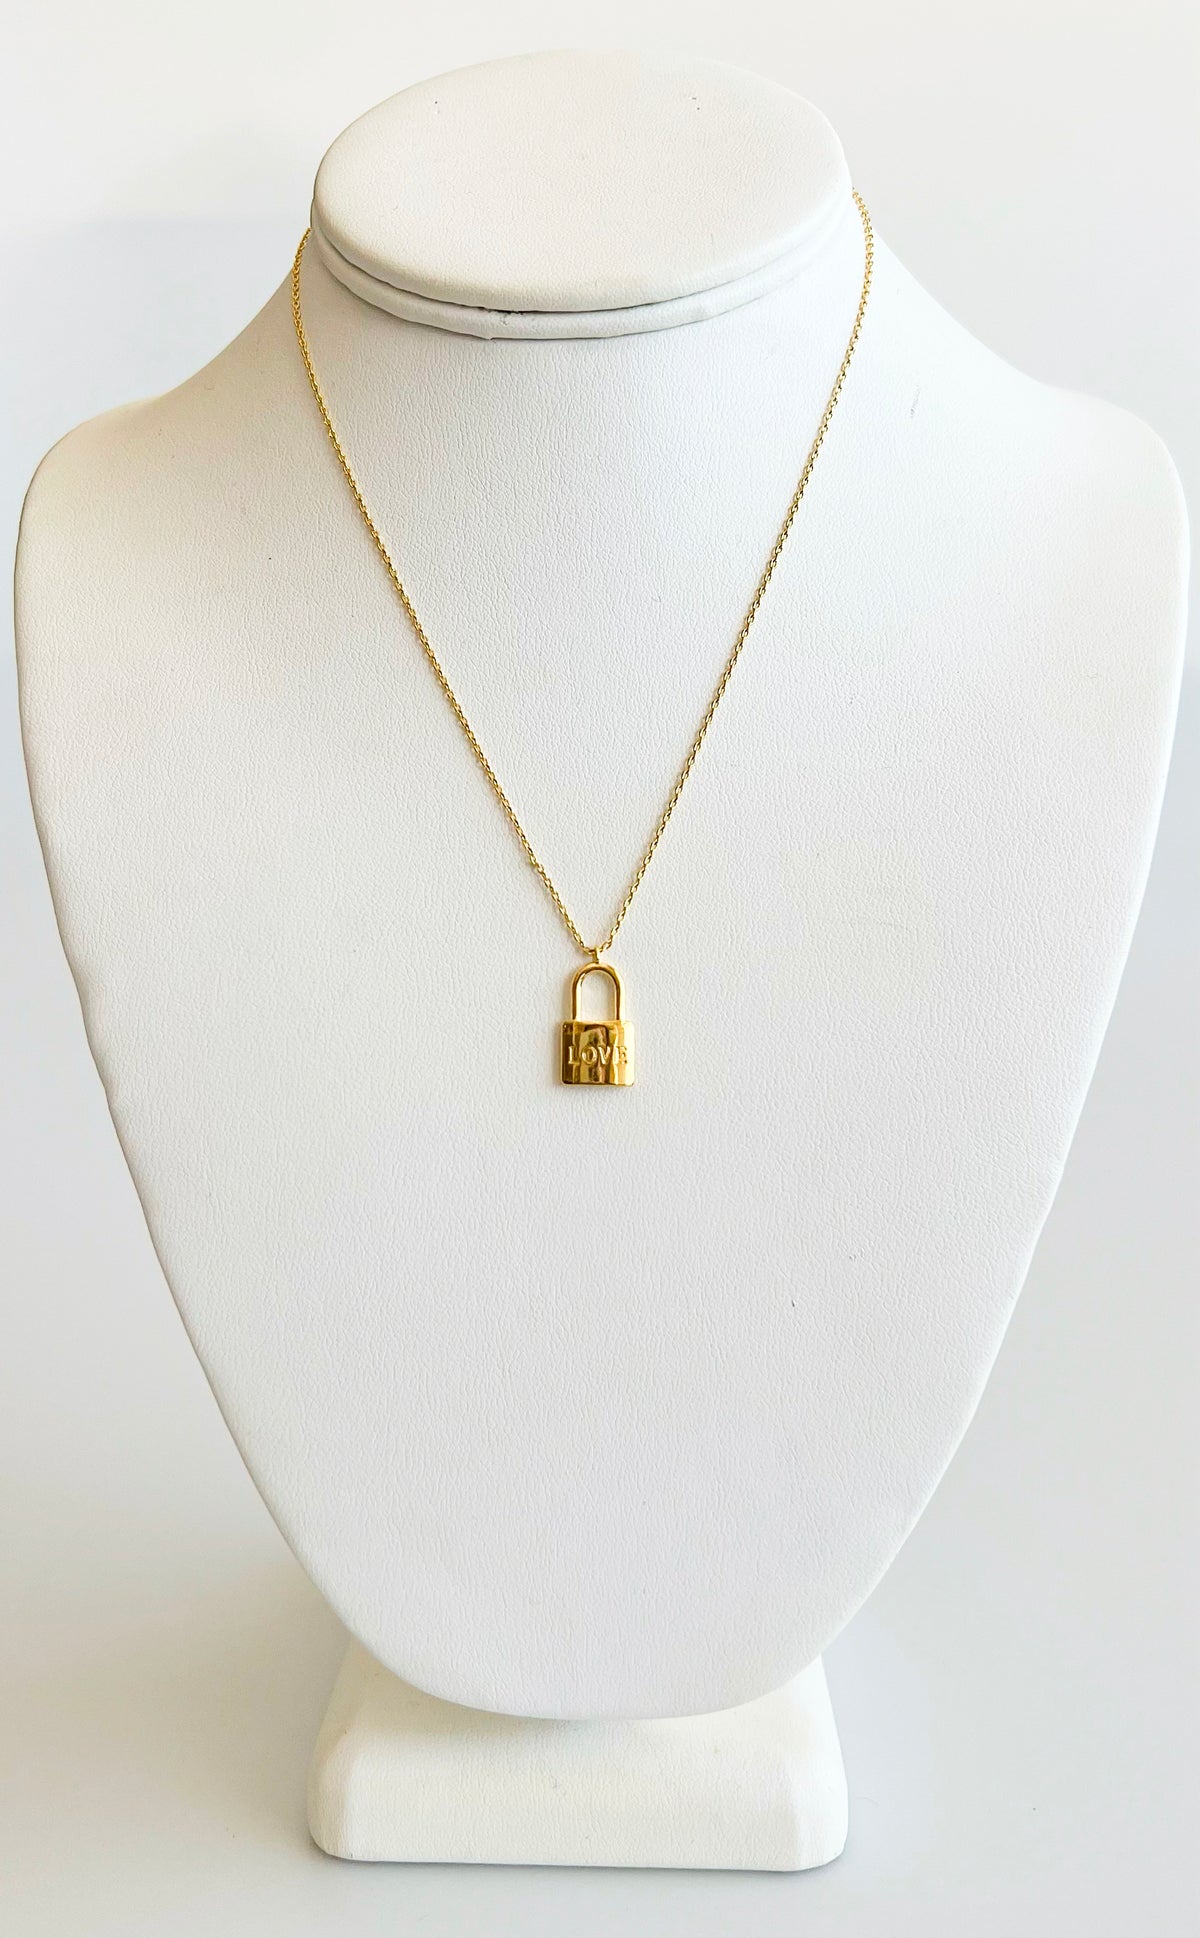 Love Lock Box Necklace-Gold-230 Jewelry-GS JEWELRY-Coastal Bloom Boutique, find the trendiest versions of the popular styles and looks Located in Indialantic, FL